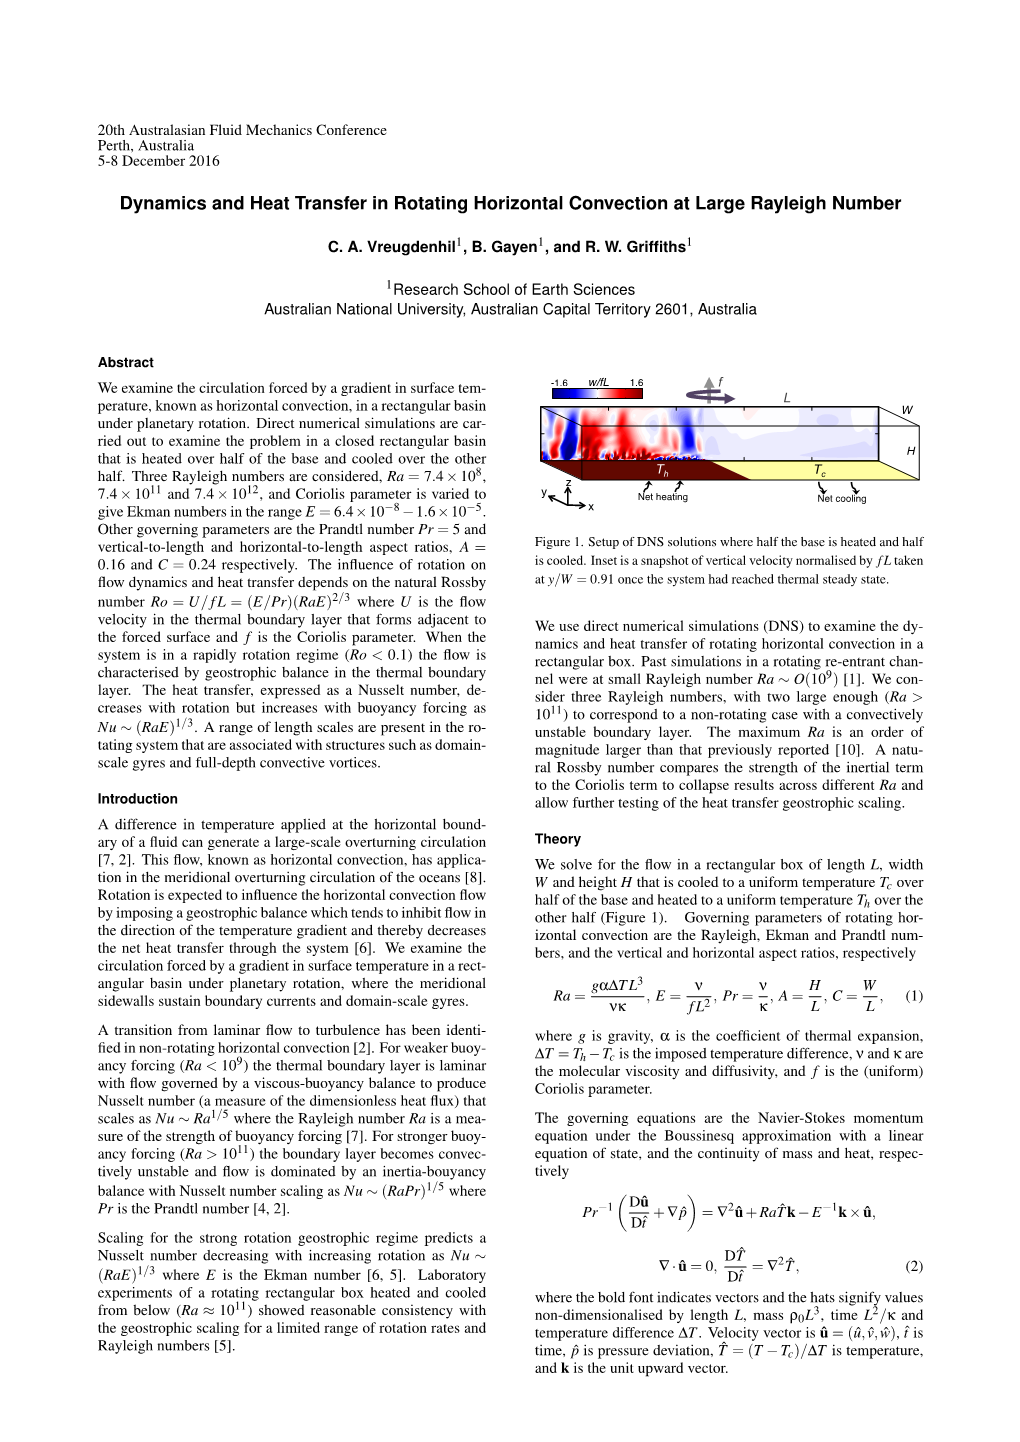 Dynamics and Heat Transfer in Rotating Horizontal Convection at Large Rayleigh Number